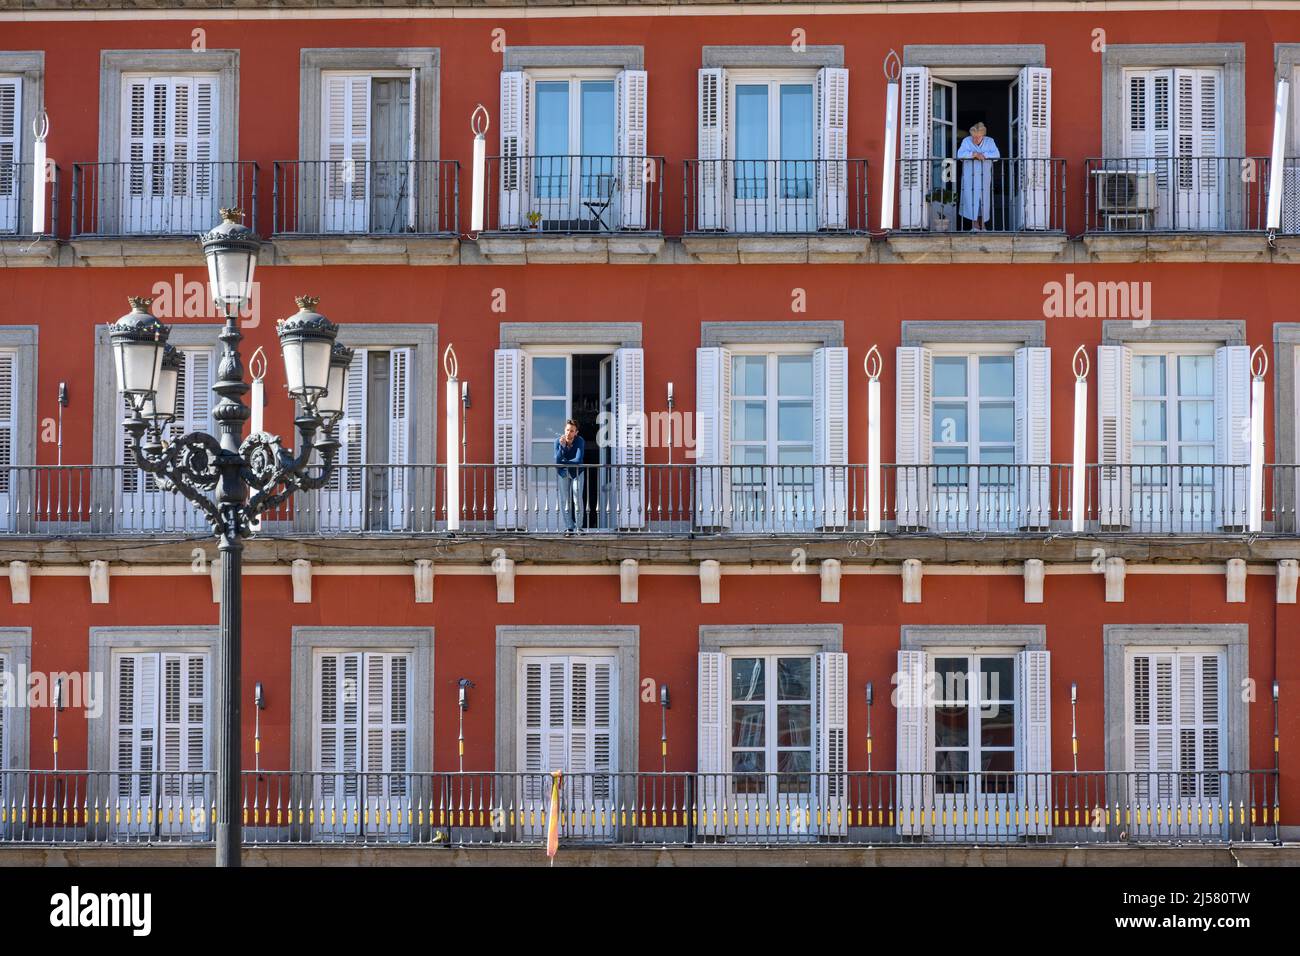 Windows and balconies on the facade of the buildings enclosing the Plaza Mayor, central Madrid, Spain. Stock Photo